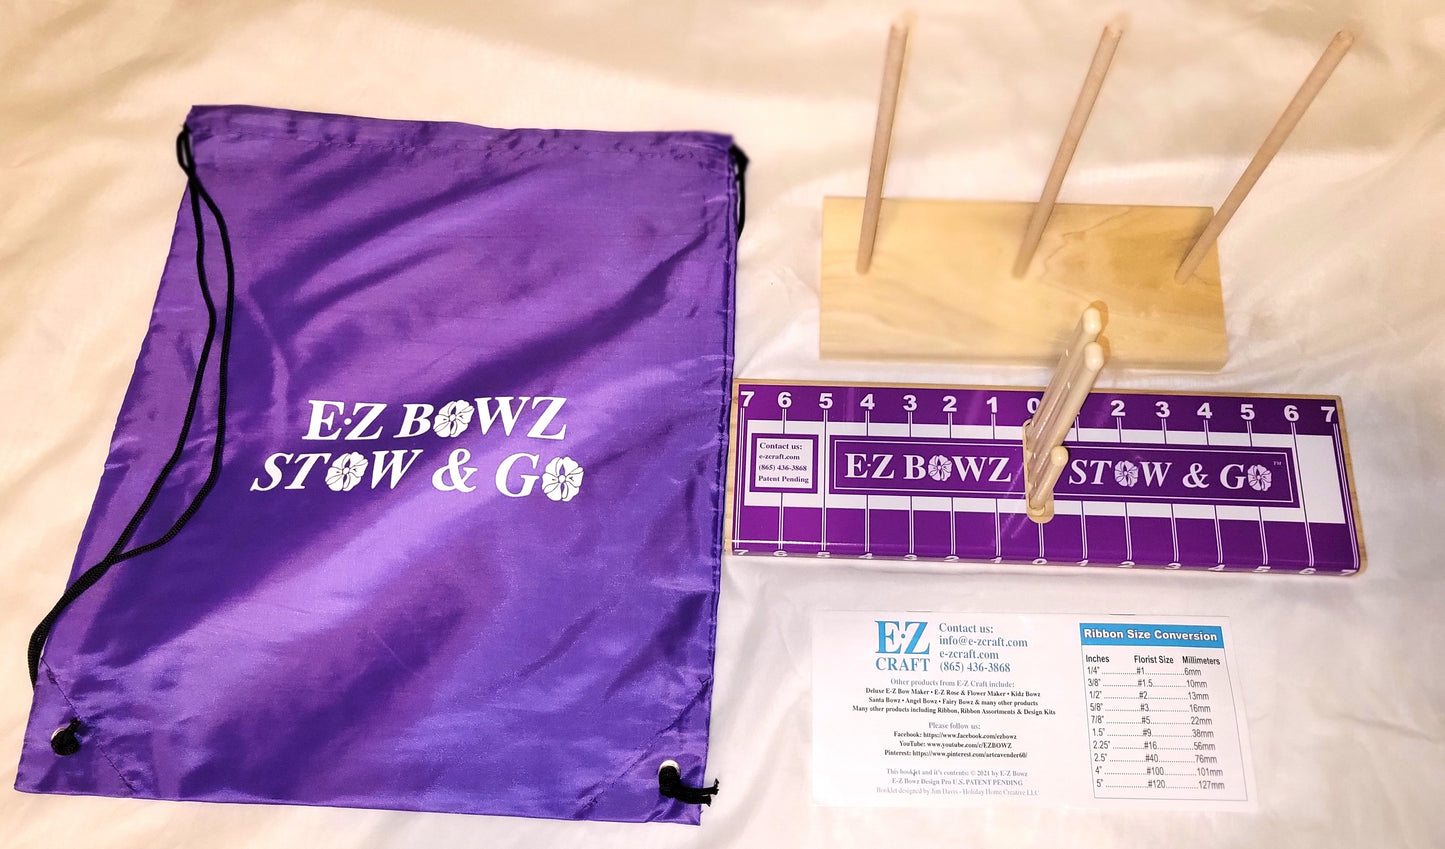 E-Z Bowz Stow & Go with matching Tote Bag